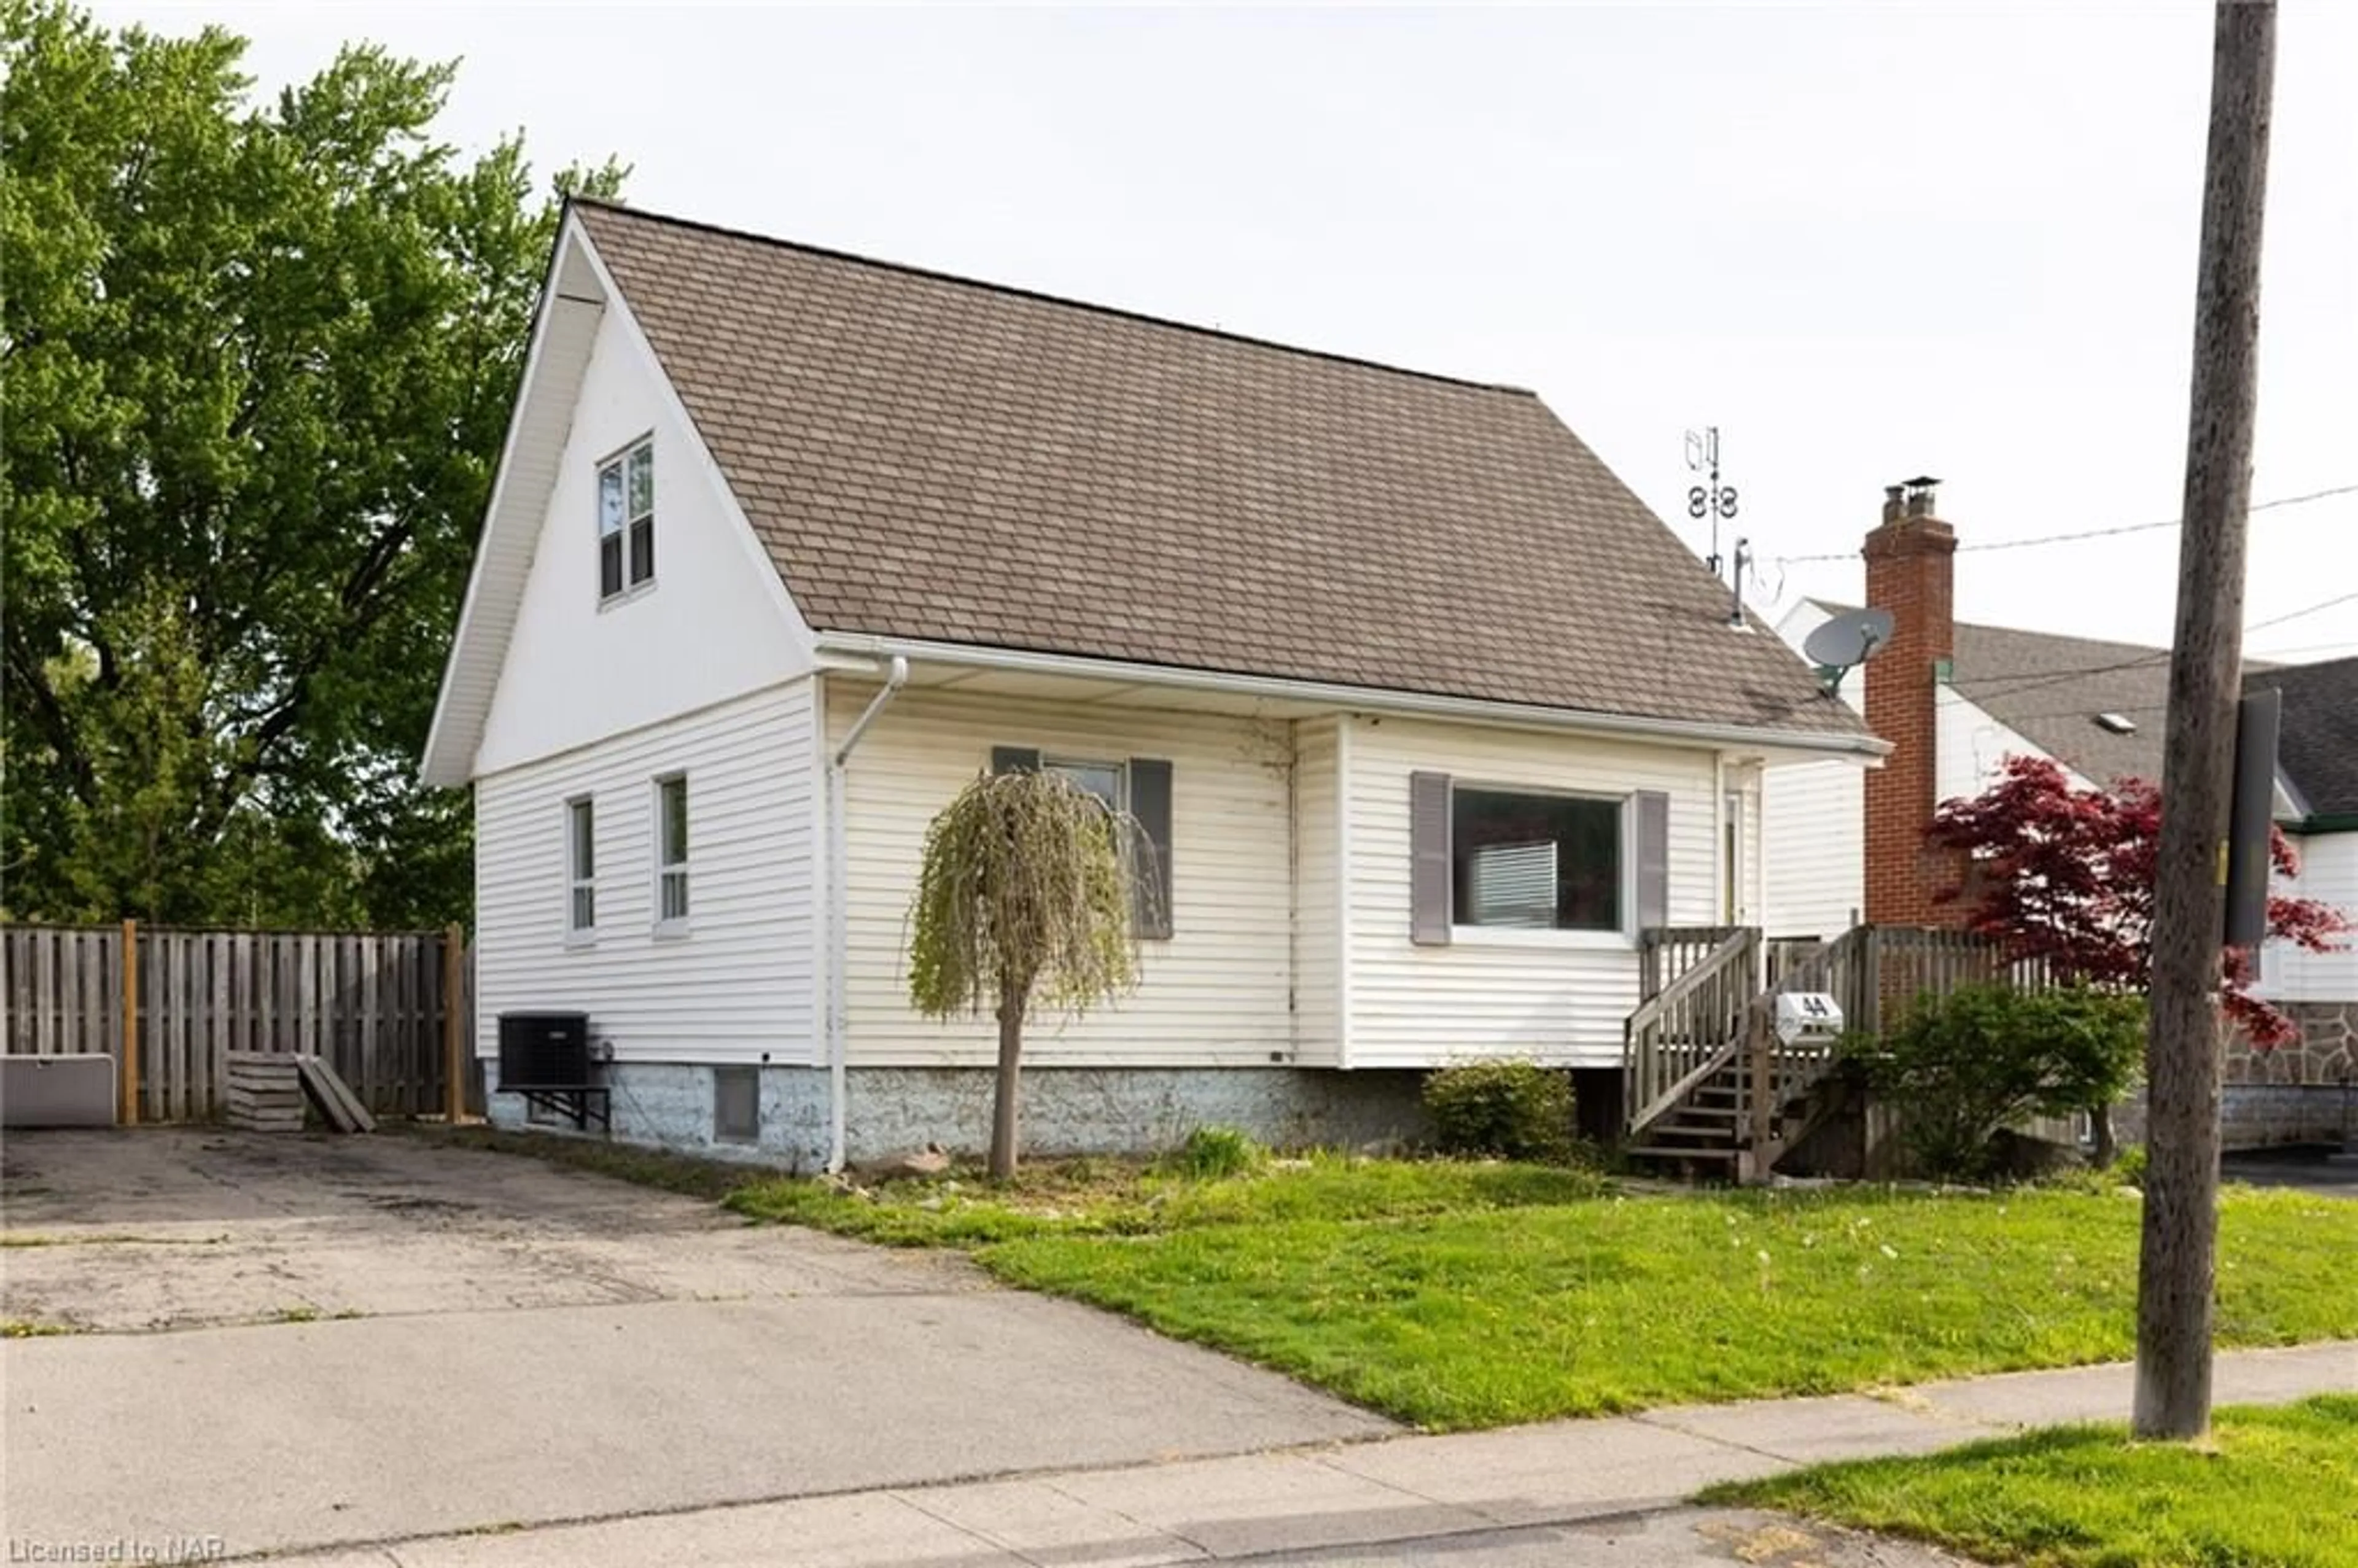 Frontside or backside of a home for 44 Thorold Rd, Welland Ontario L3C 3T6